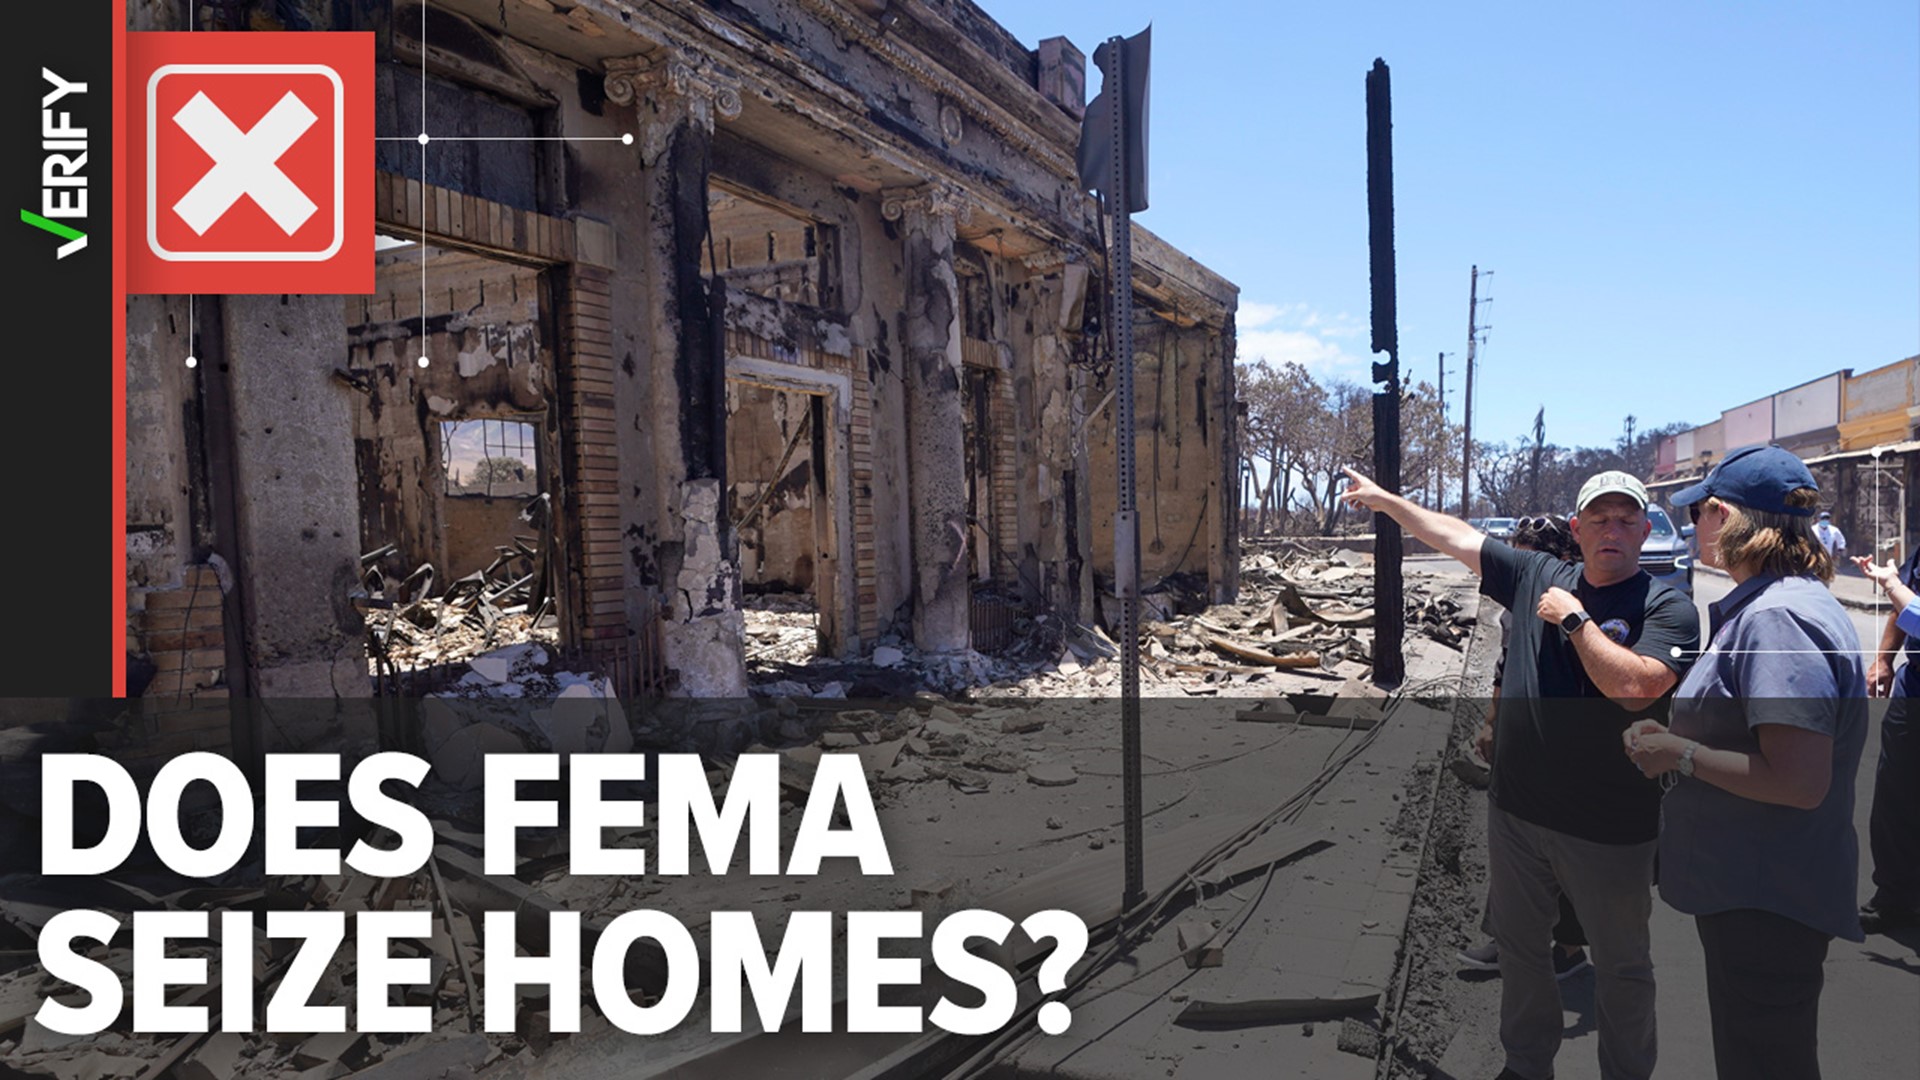 A rumor warns people affected by Maui’s wildfires that FEMA may seize property in exchange for assistance. But FEMA has no policy or authority to do this.